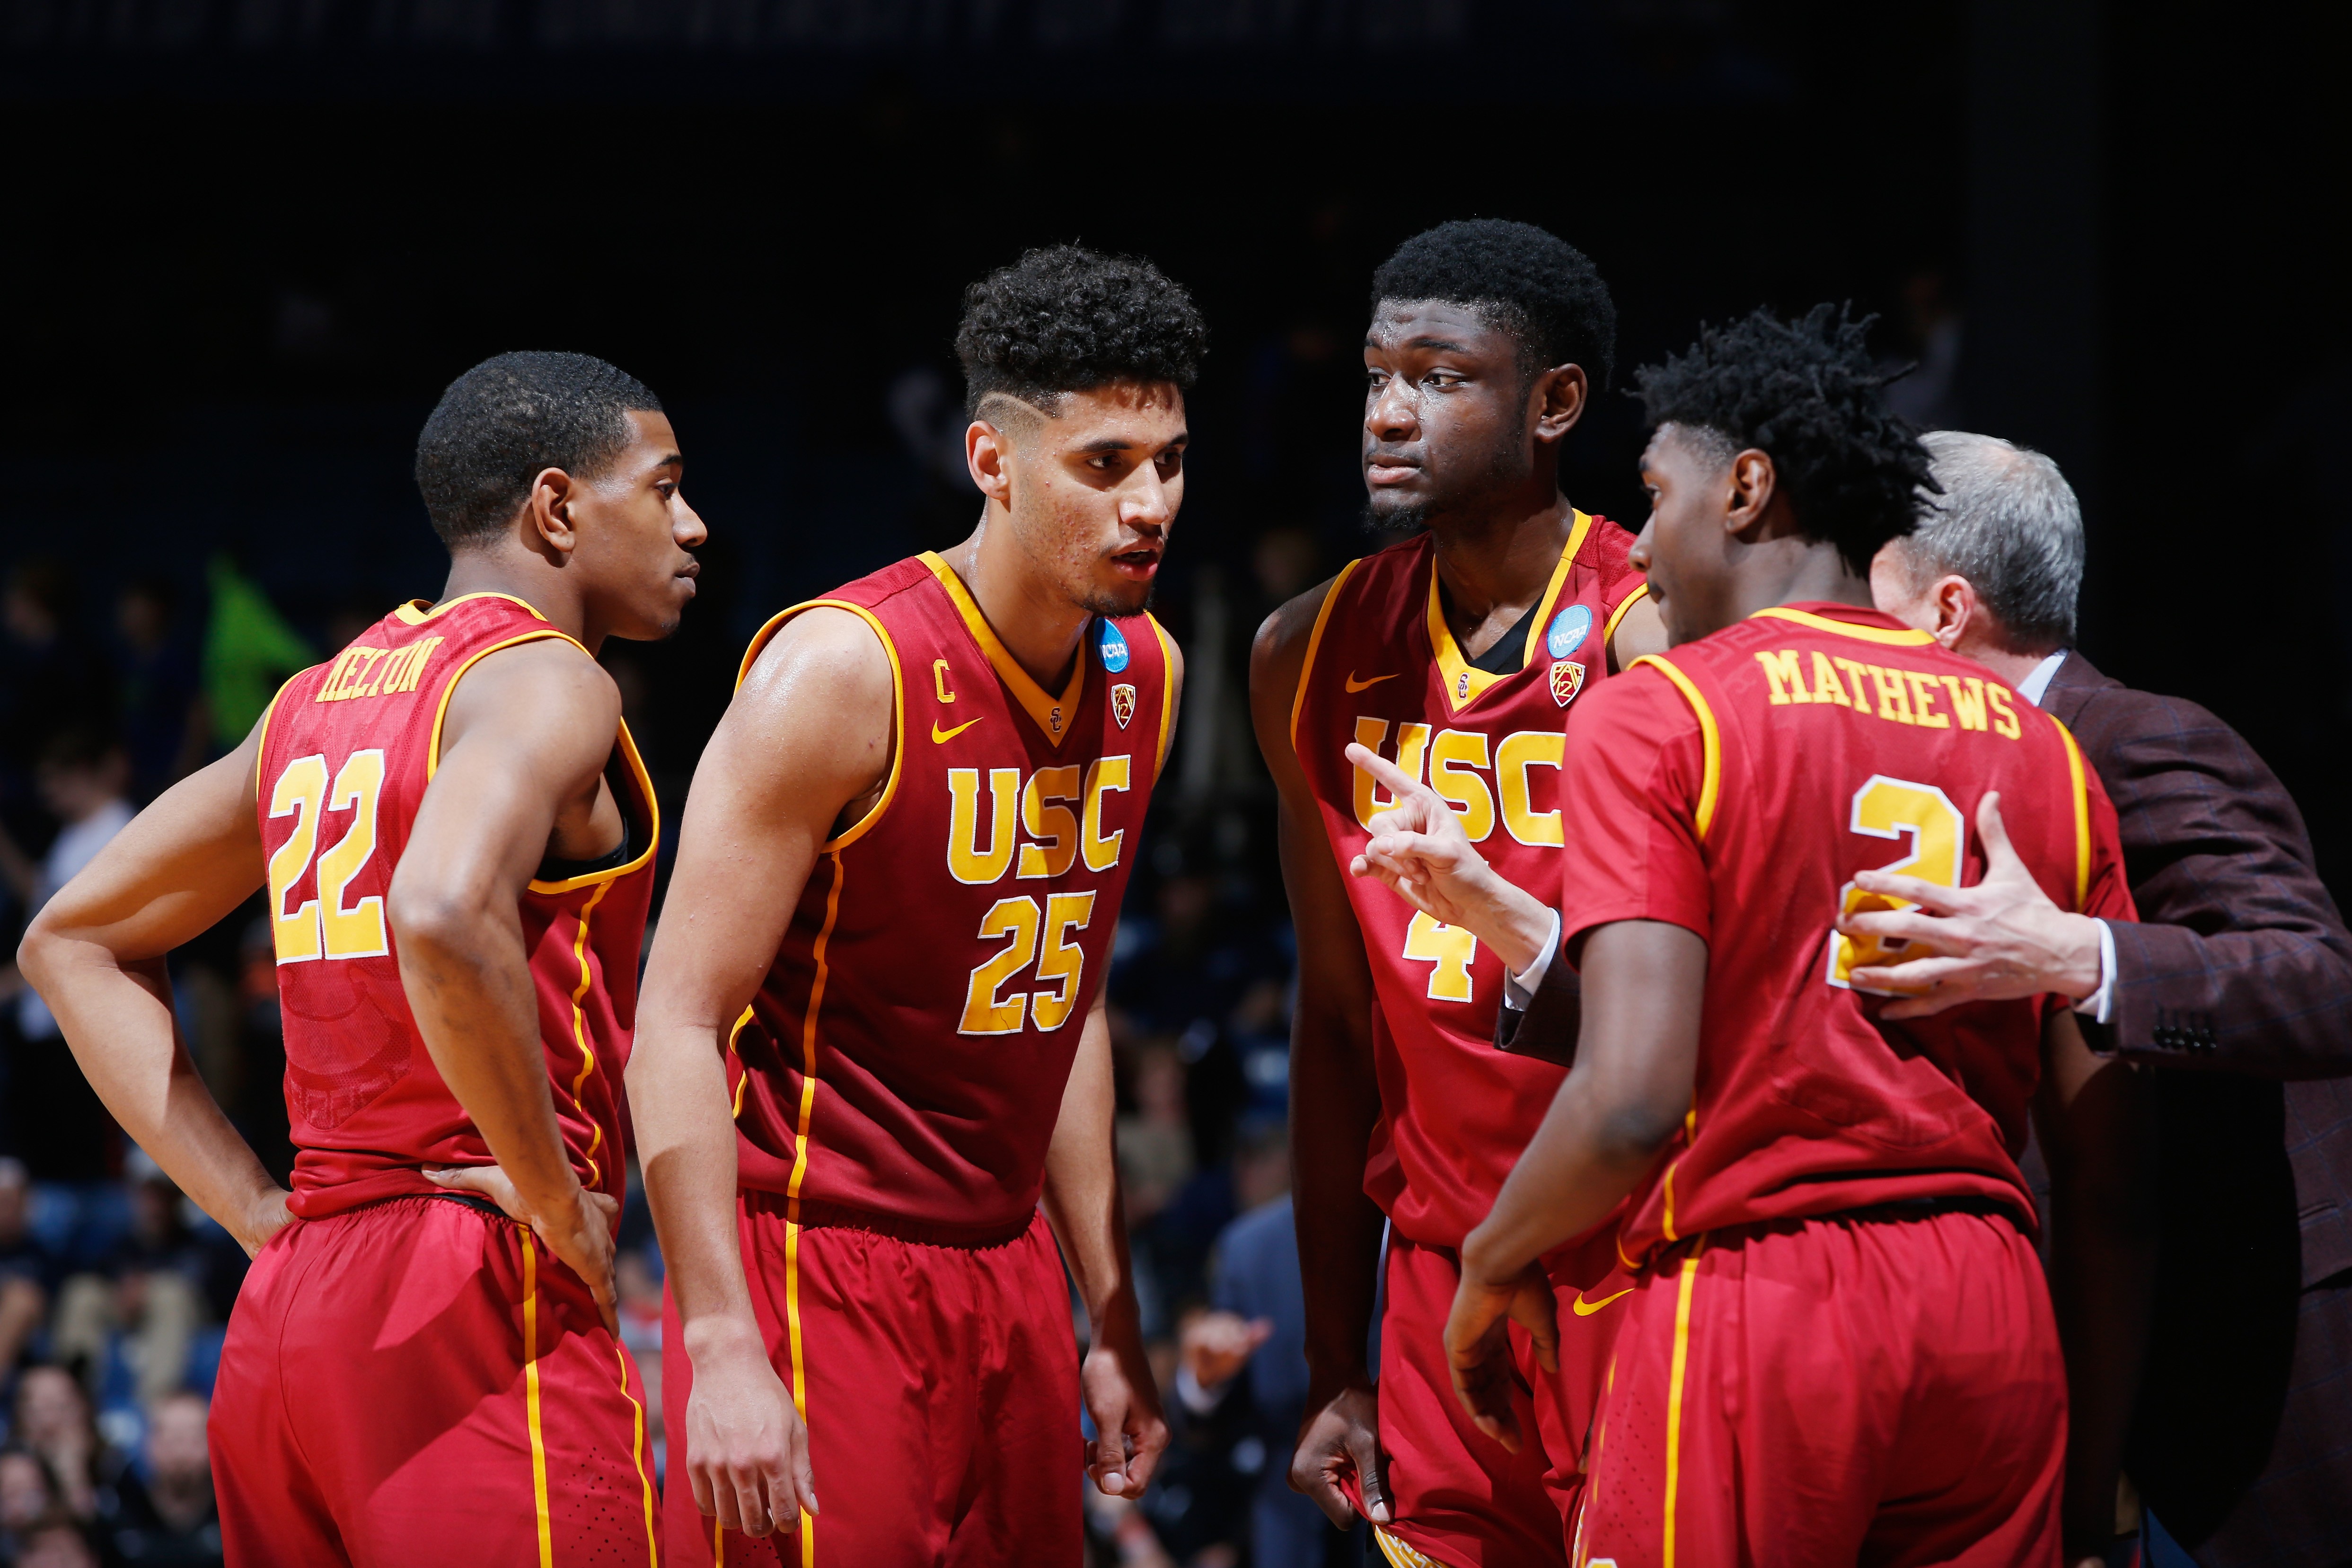 USC Basketball 201718 schedule announced